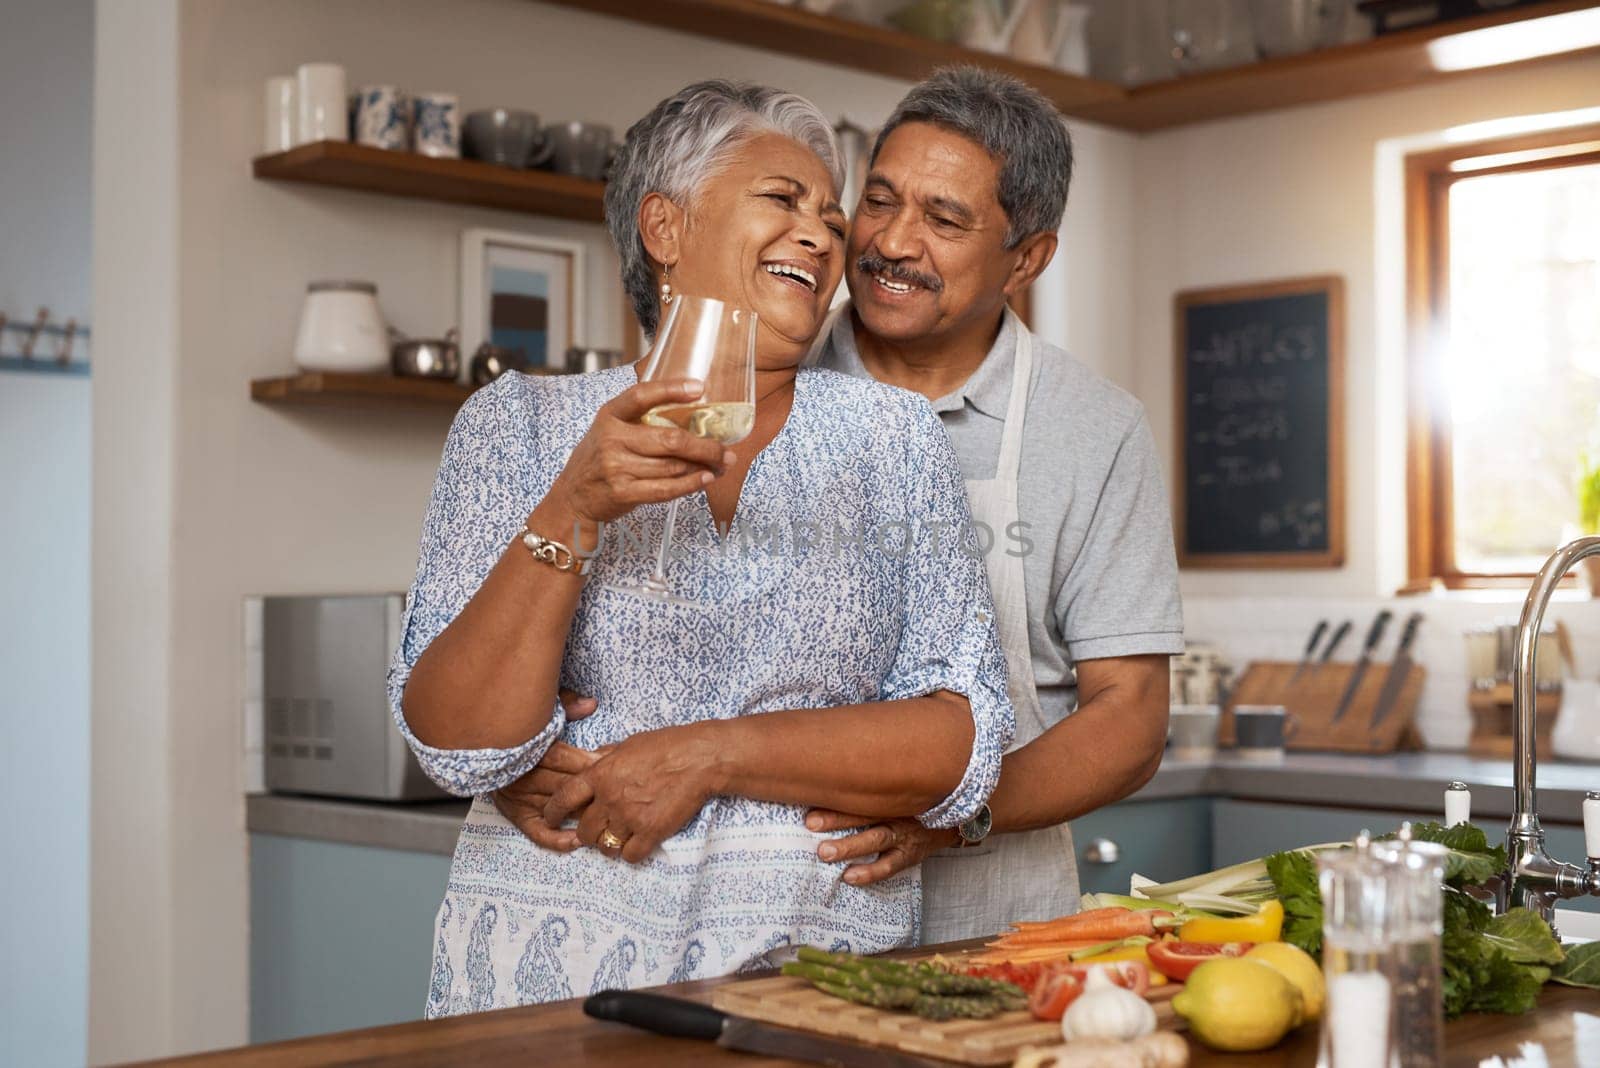 Hug, old woman and man in kitchen with wine glass, happiness and cooking healthy vegetable dinner together. Smile, love and food, happy senior couple in retirement with drink, vegetables and wellness.